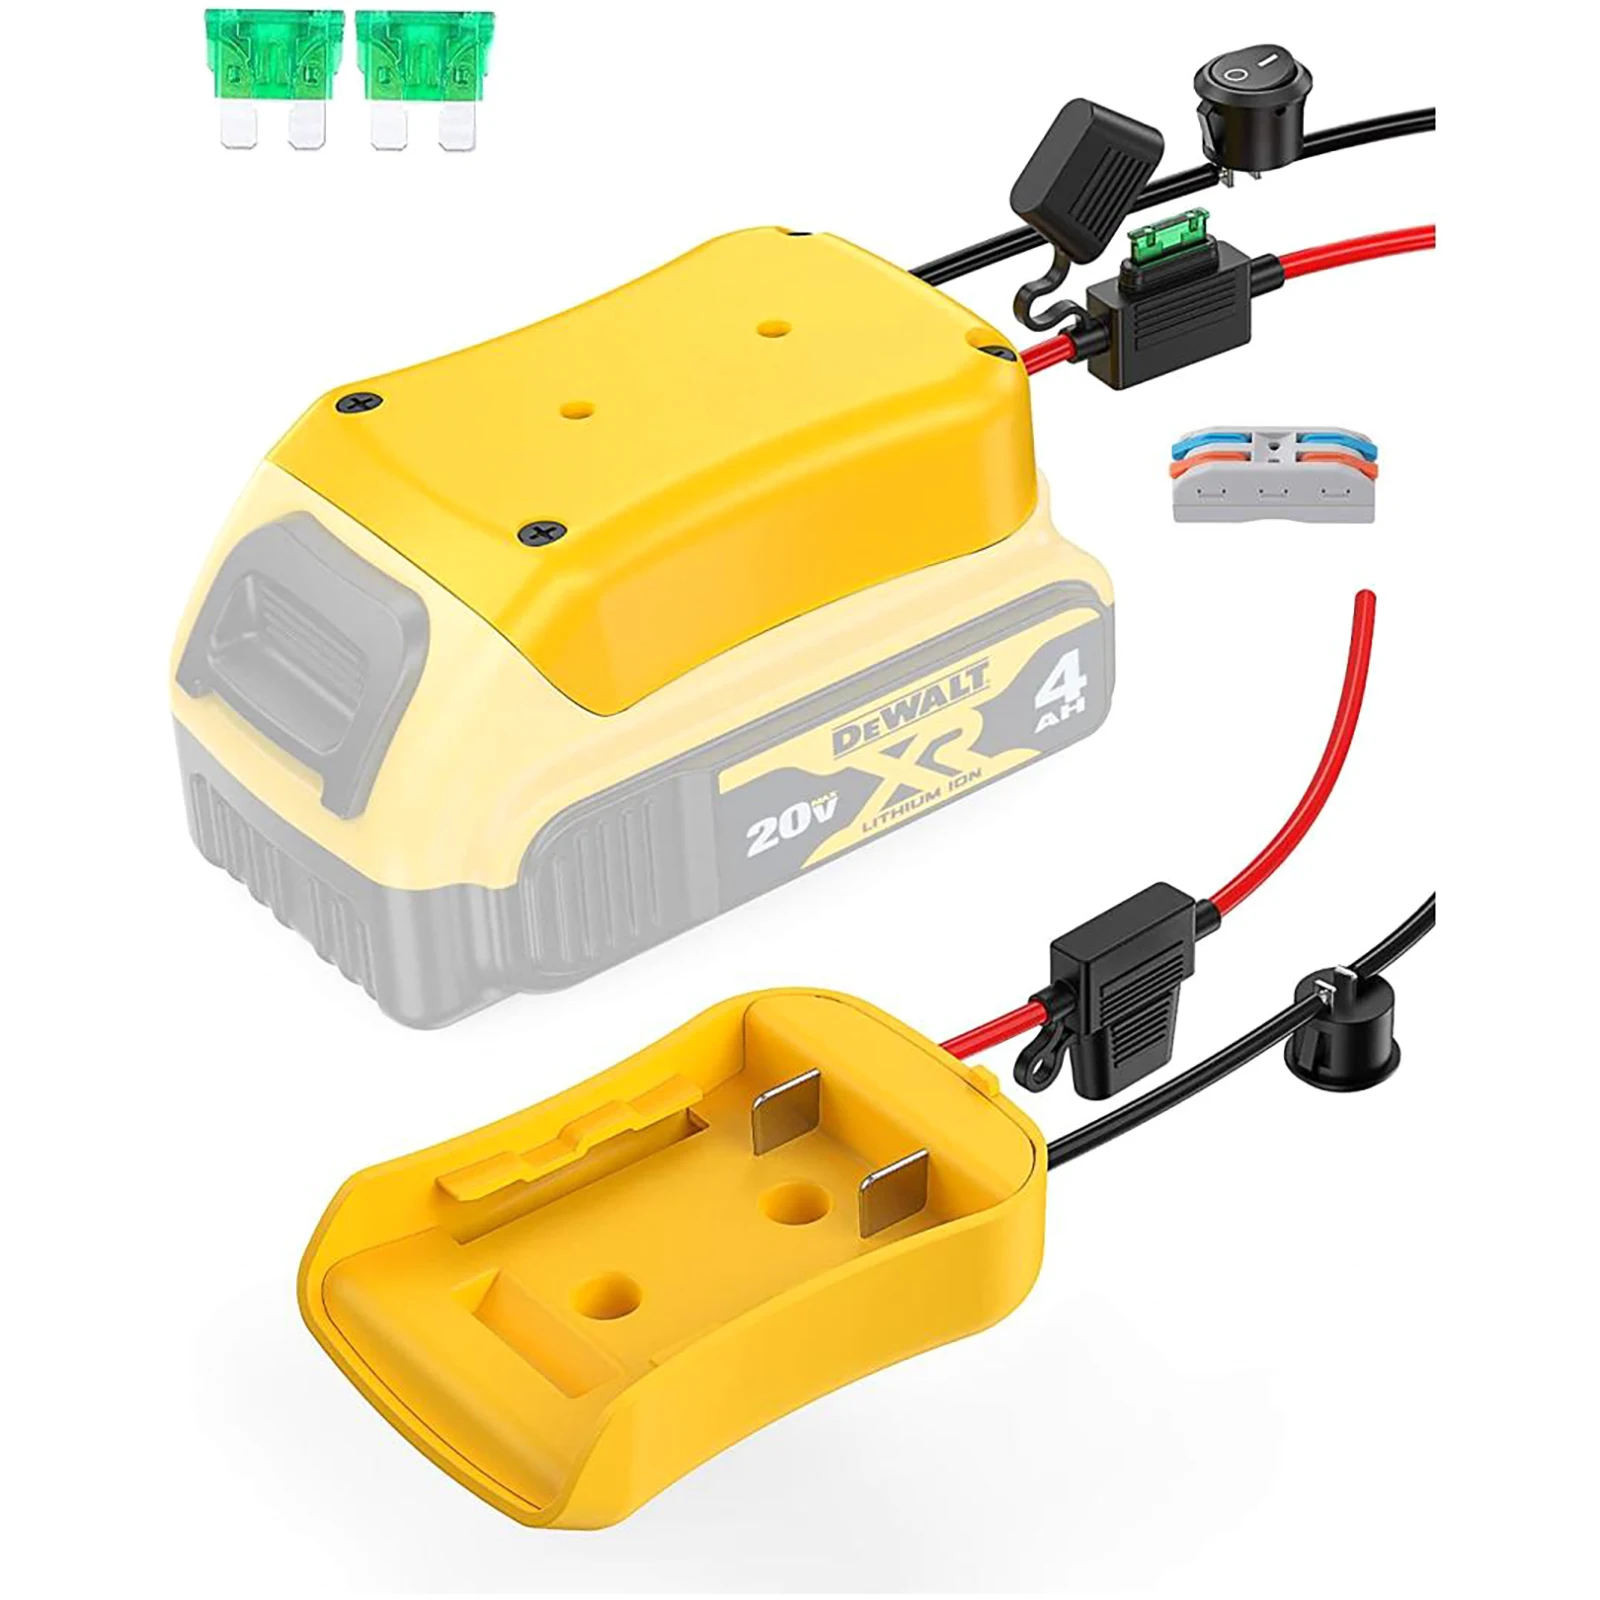 

1Pc Power Wheels Adapter Dock For Dewalt 14.4V 18V 20V Battery With Fuse 12AWG Wire & Switch DIY Battery Adapter Power Connector